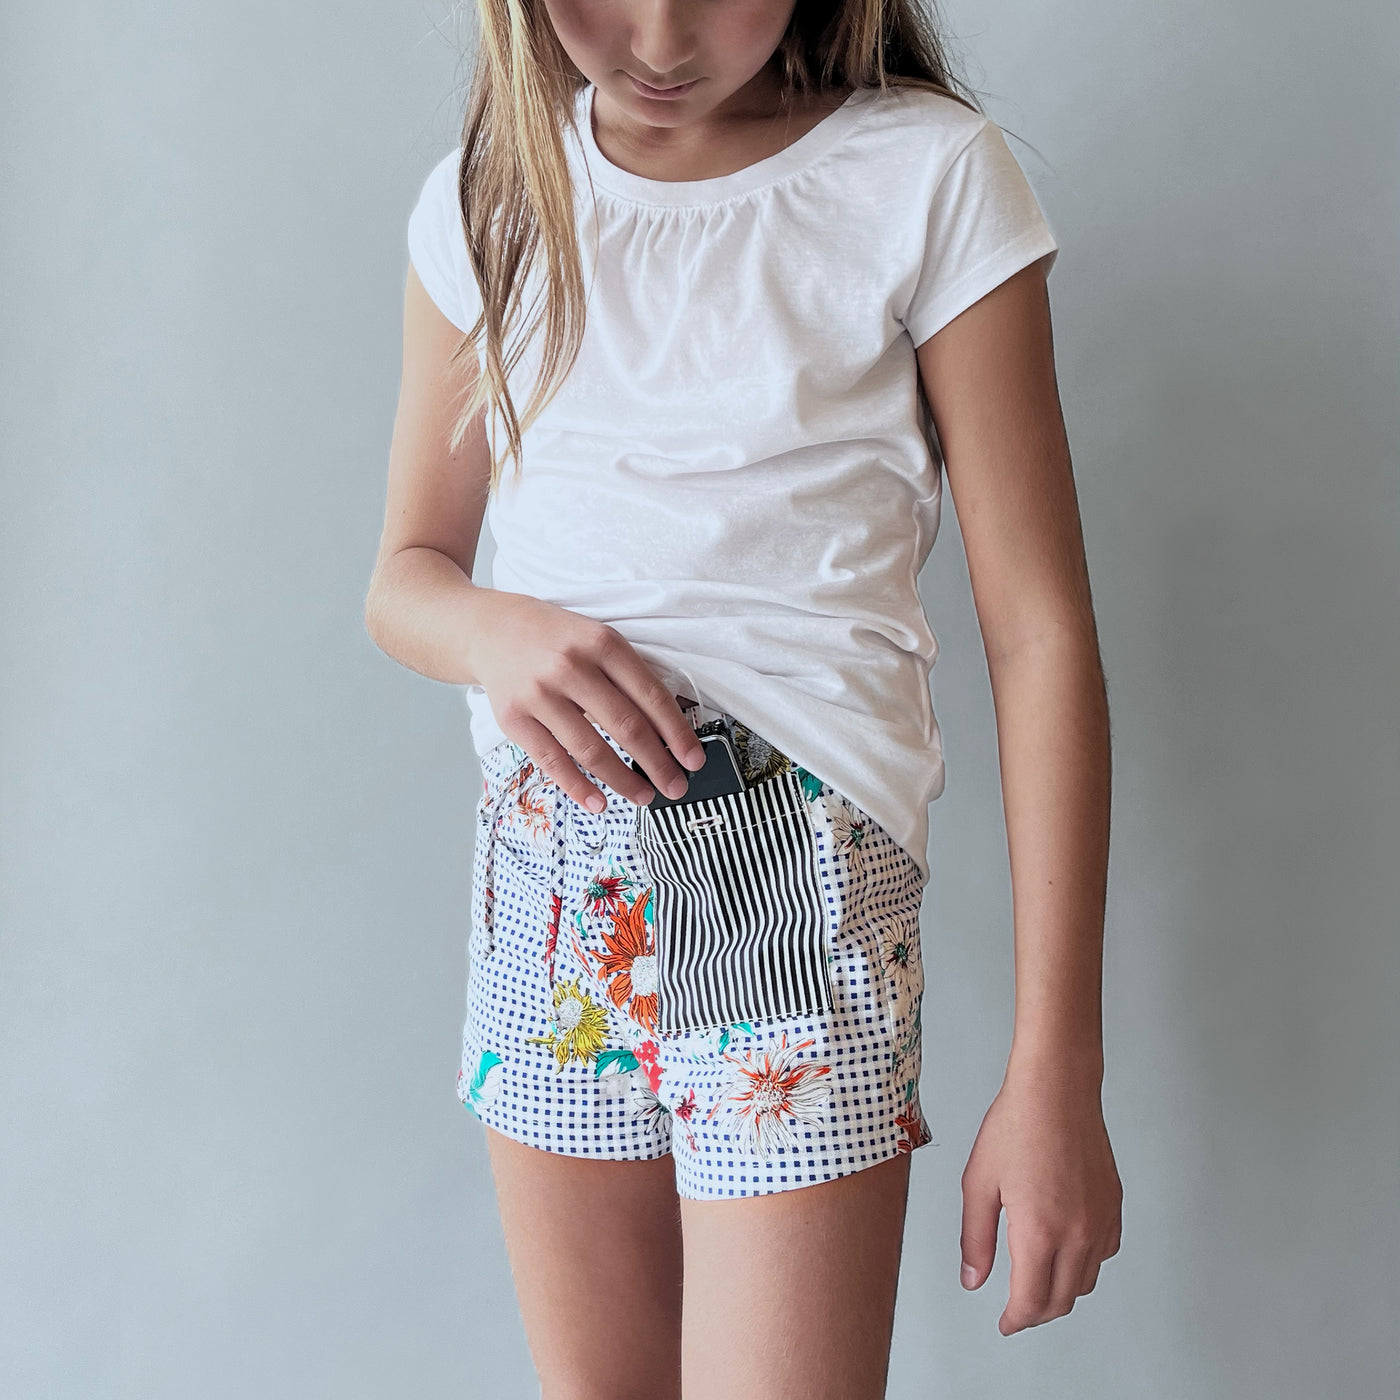 Kids diabetes sleep short with insulin pump holder. Pocket fits both Tandem and Medtronic insulin pumps.